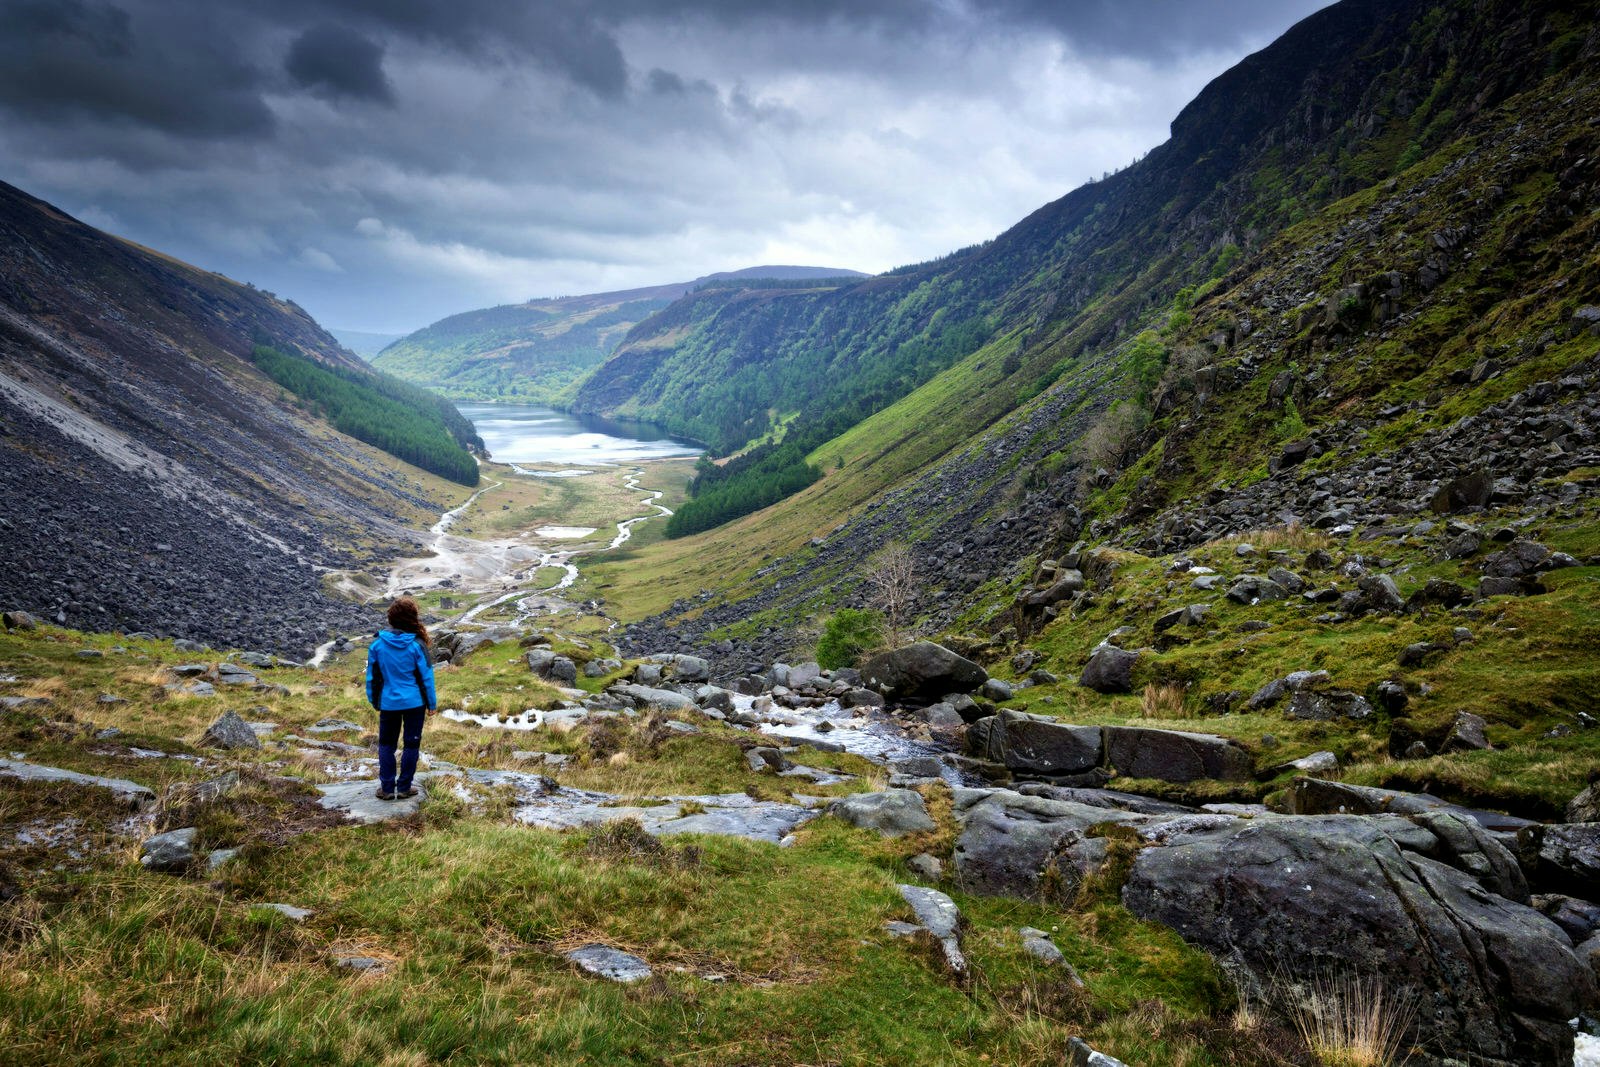 A person in a blue coat stands looking at Glendalough, a valley carved by a glacier.